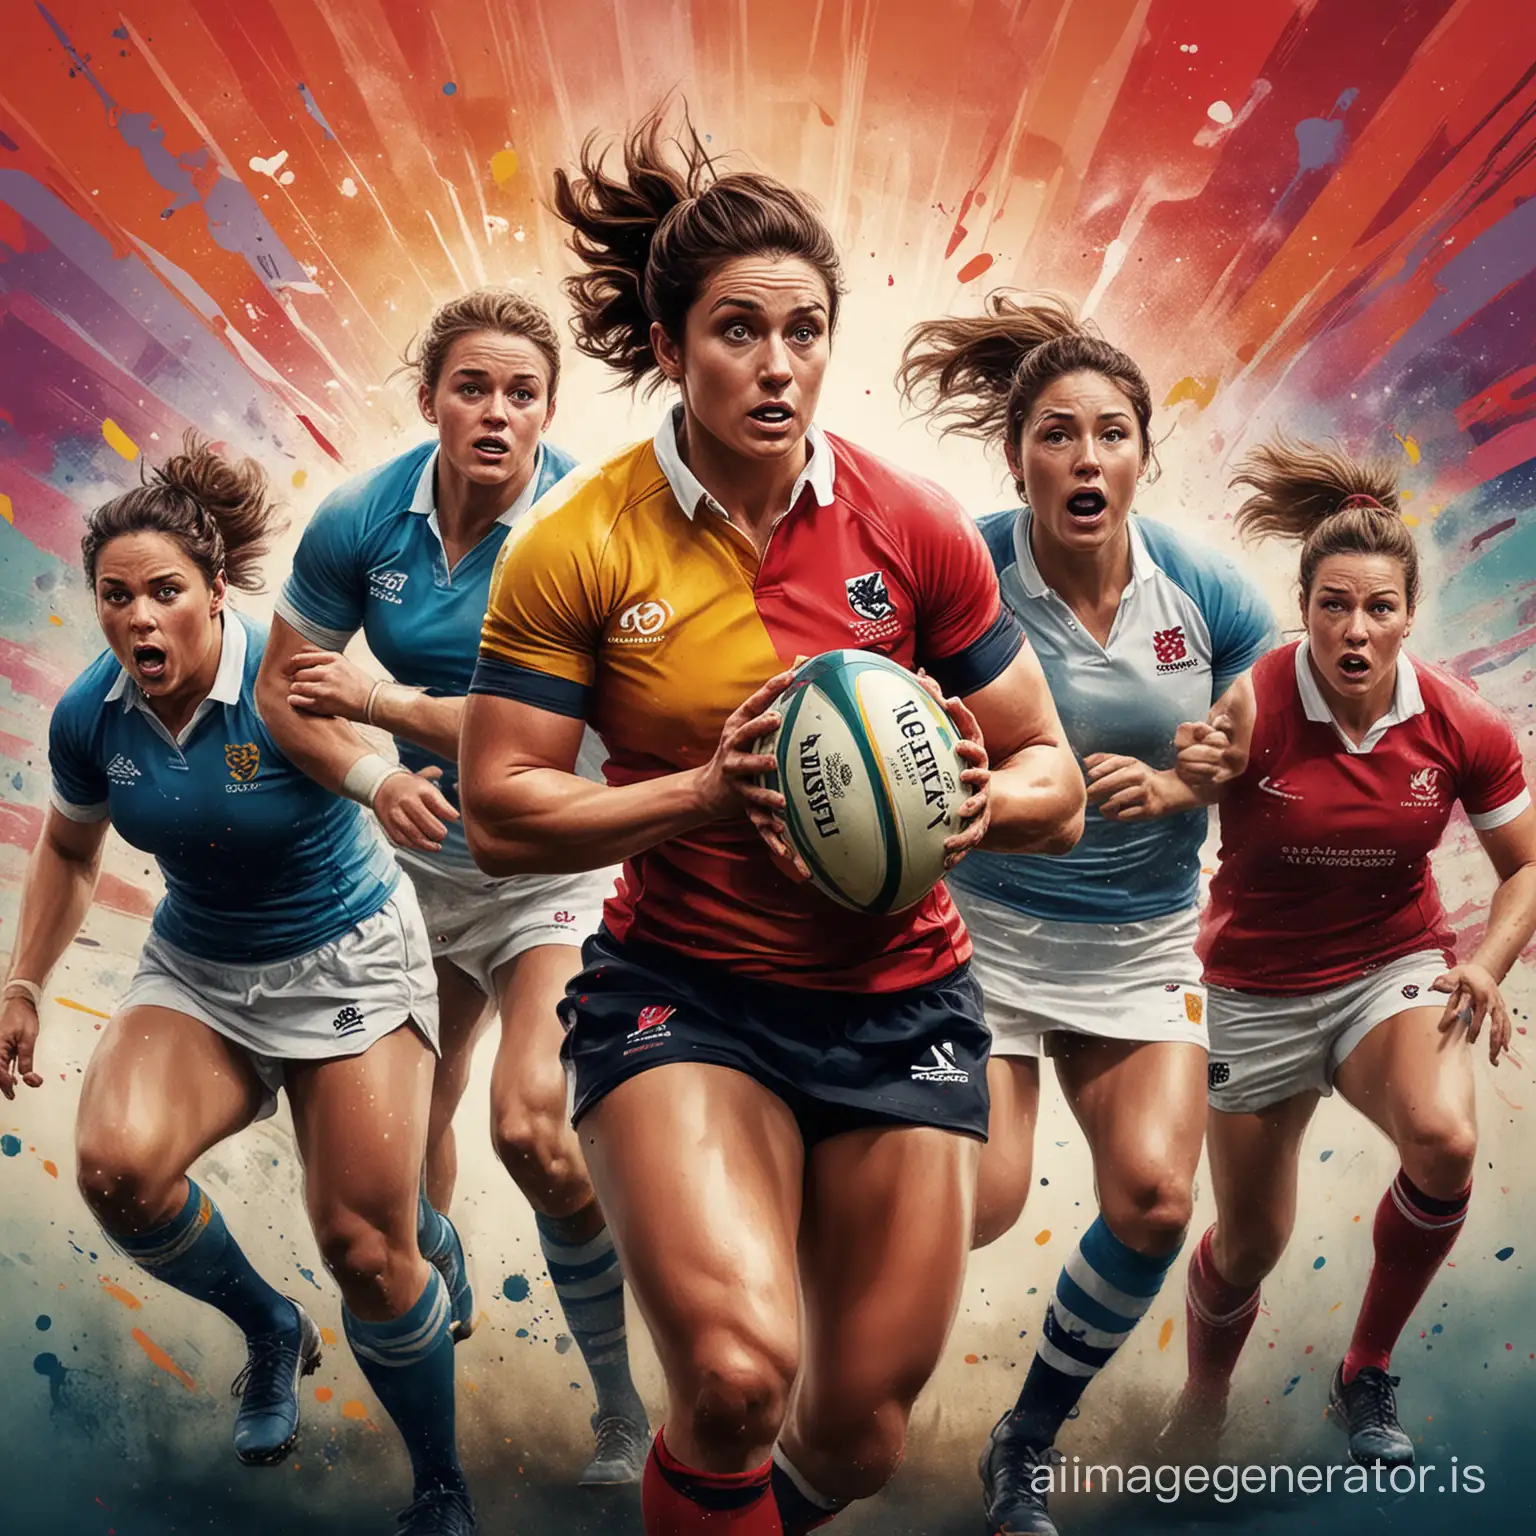 Empowering-Rugby-Women-Icons-Celebrating-Diversity-and-Creativity